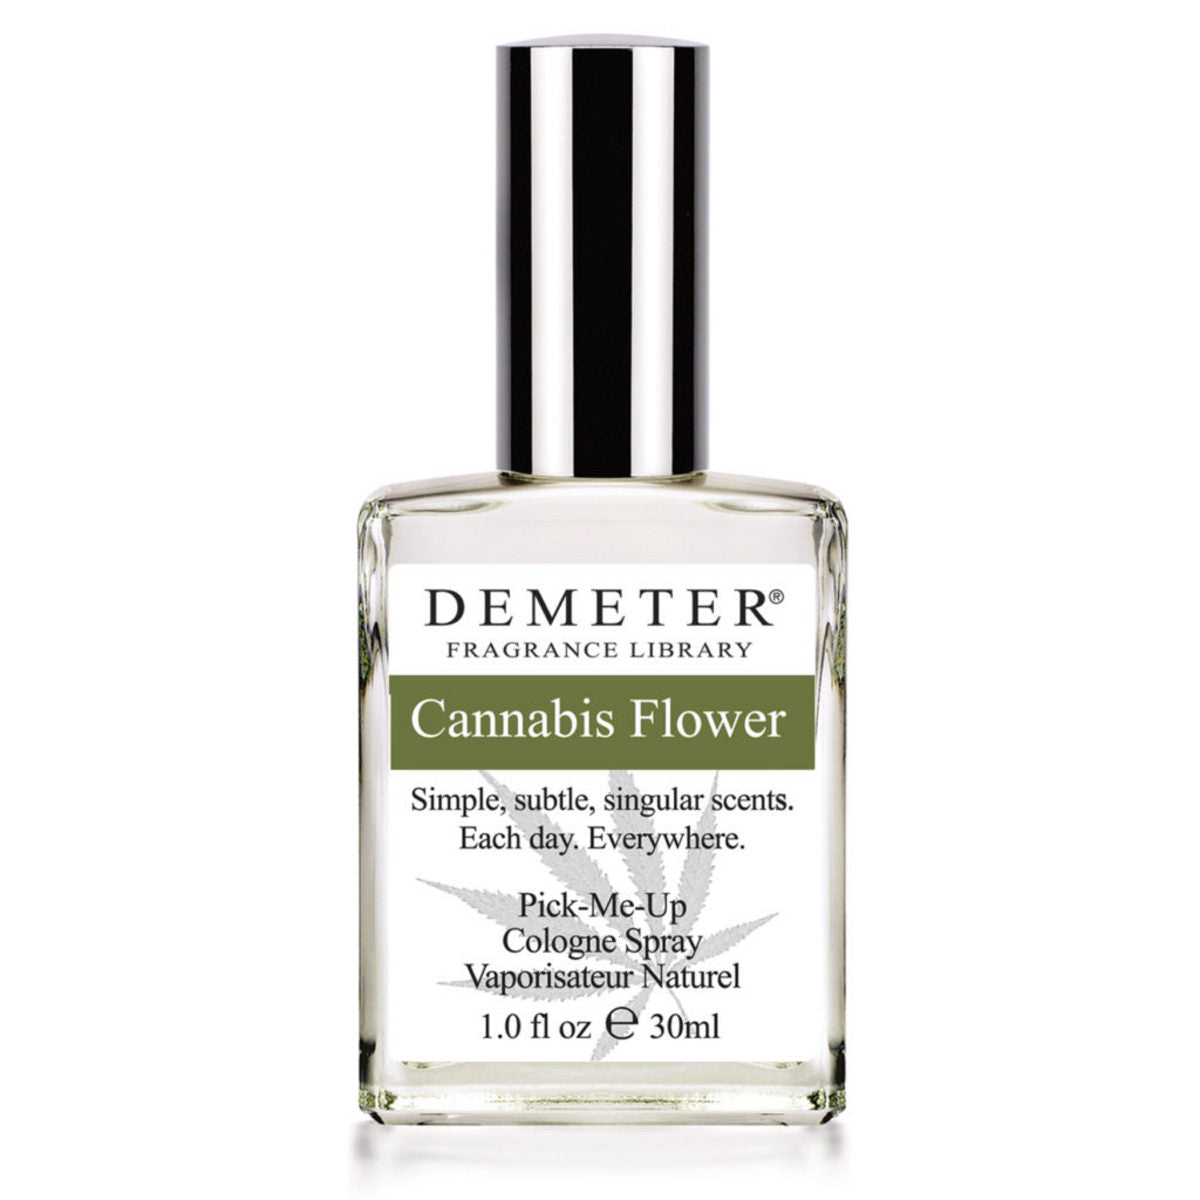 Primary image of Cannabis Flower Cologne Spray